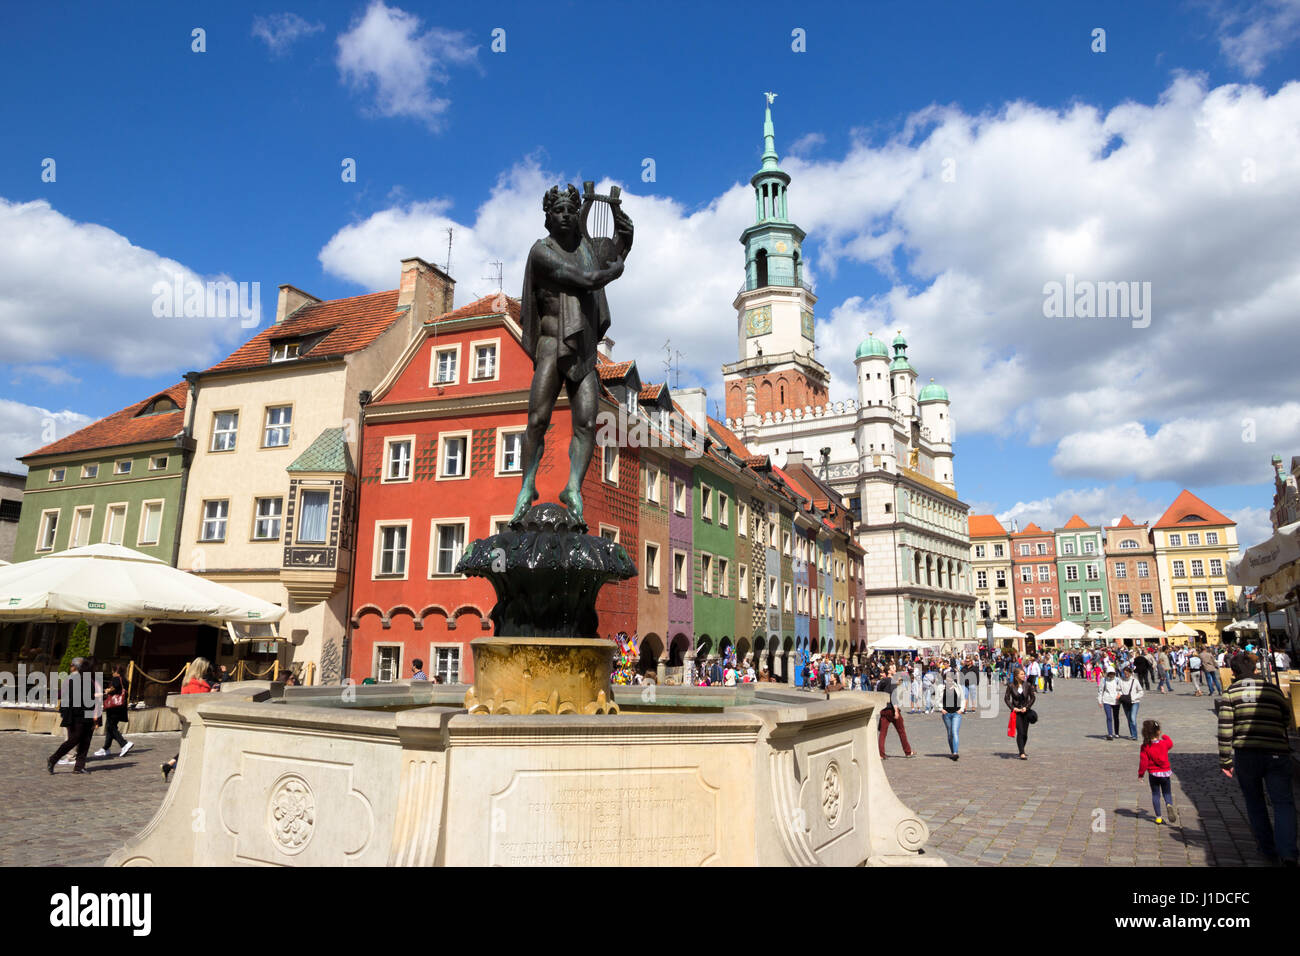 POZNAN, POLAND - AUG 20, 2014: Orpheus statue on the colorful main square in Poznan. Stock Photo